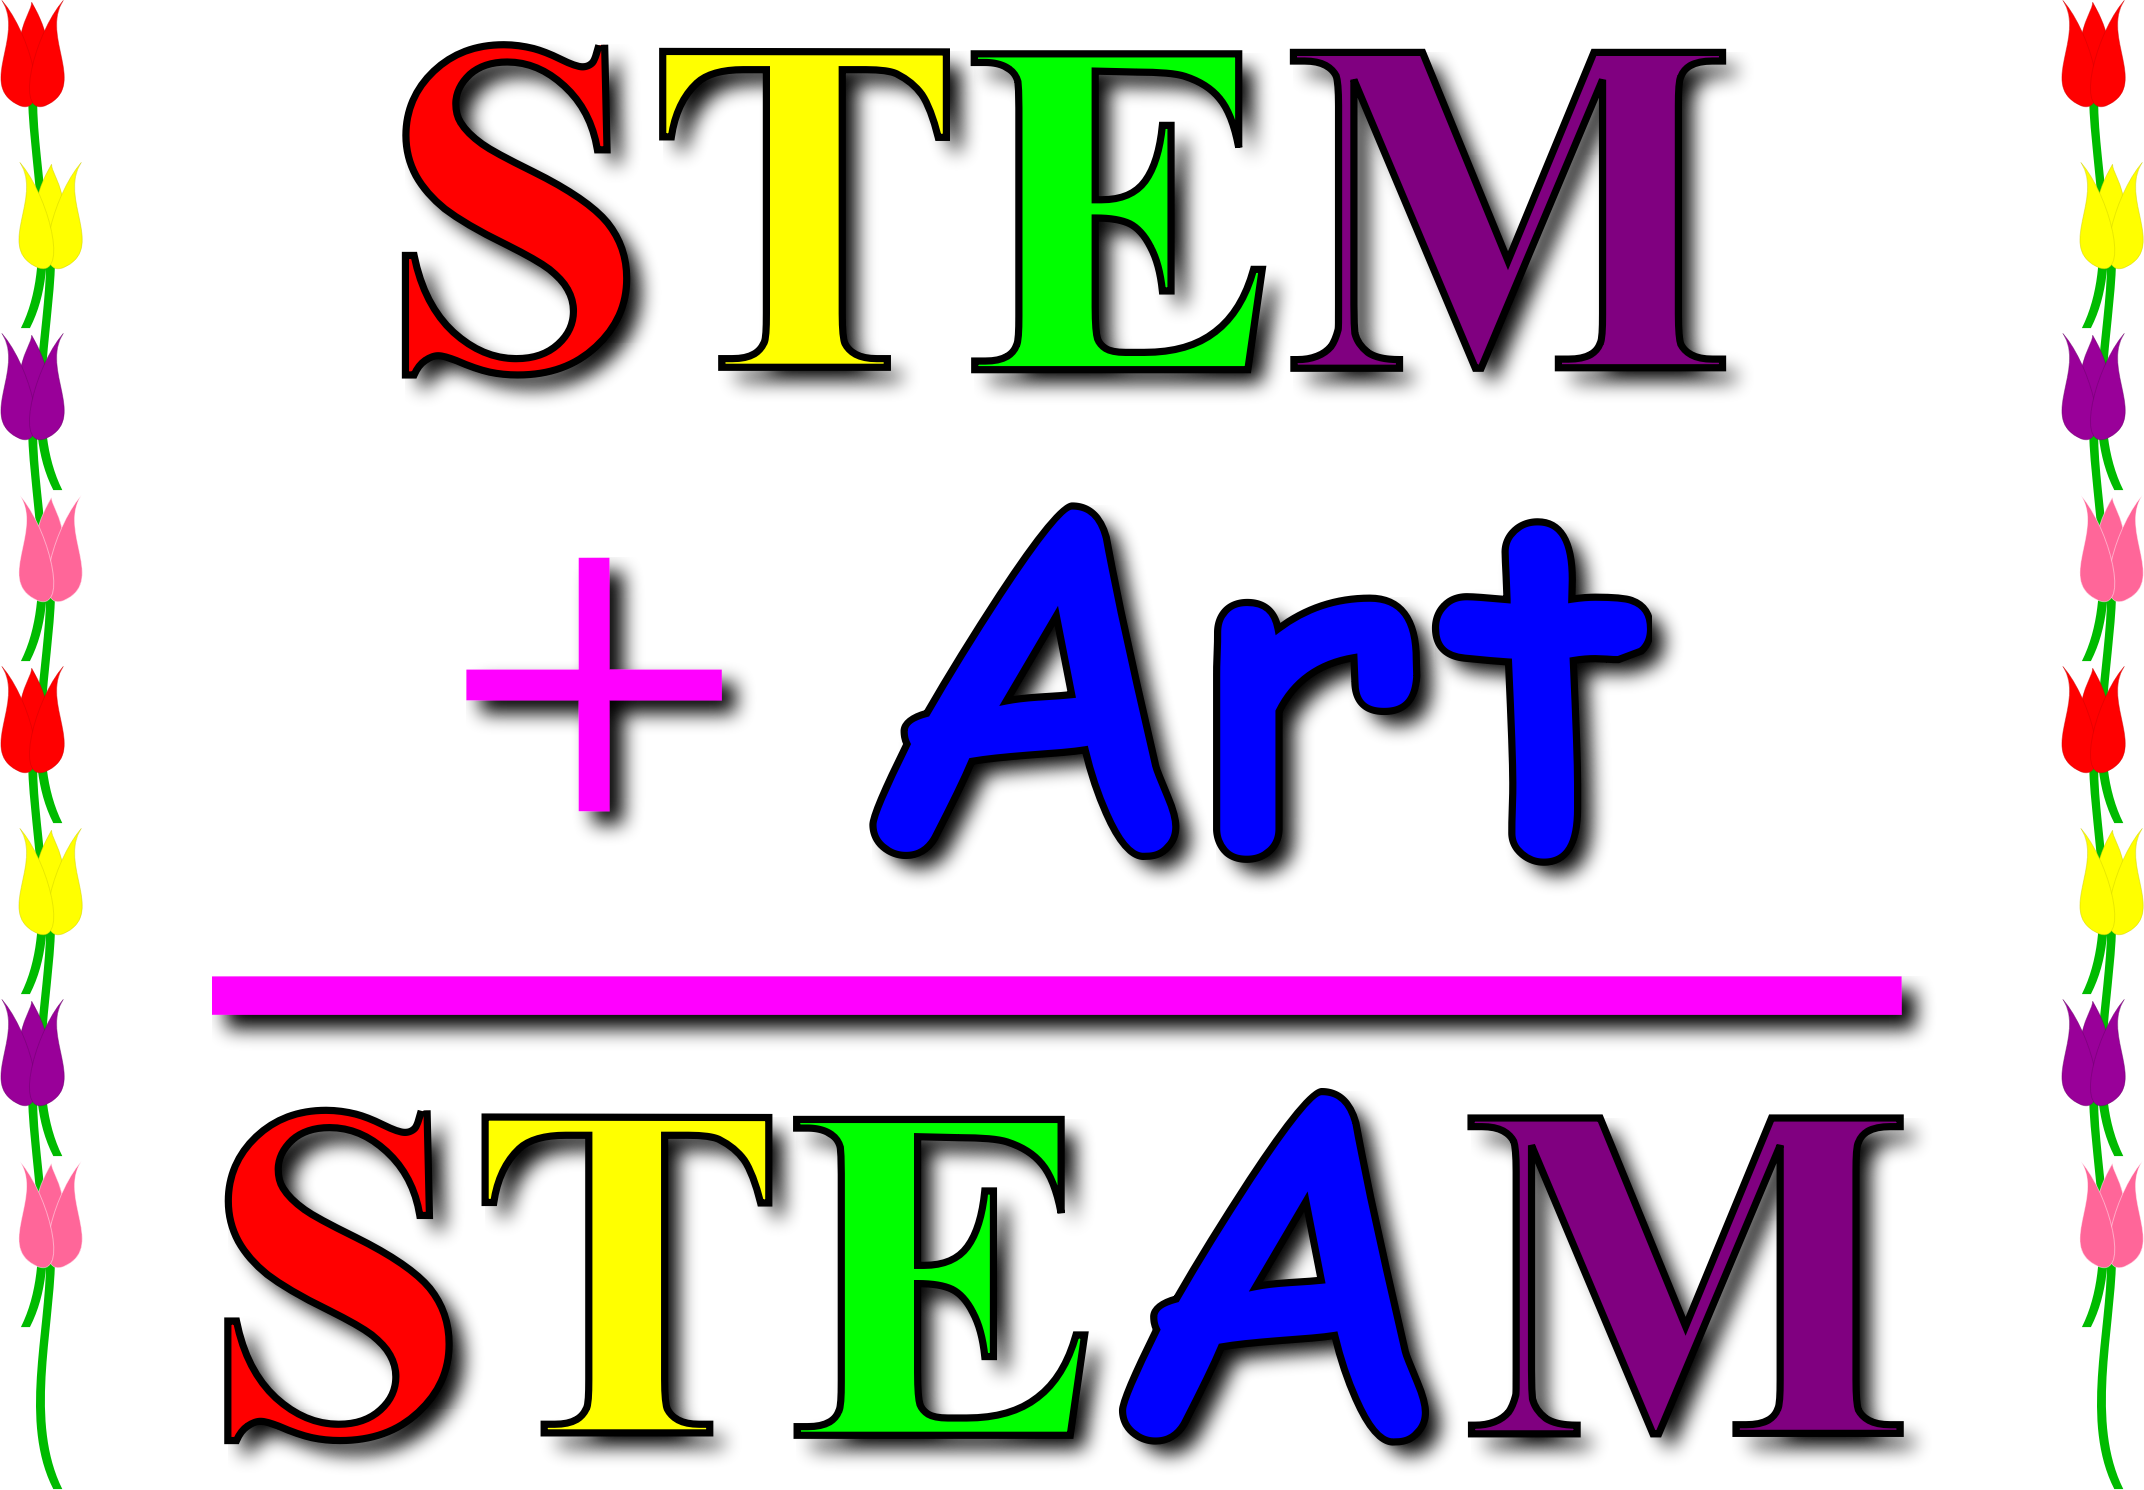 Steam science technology engineering and math фото 111